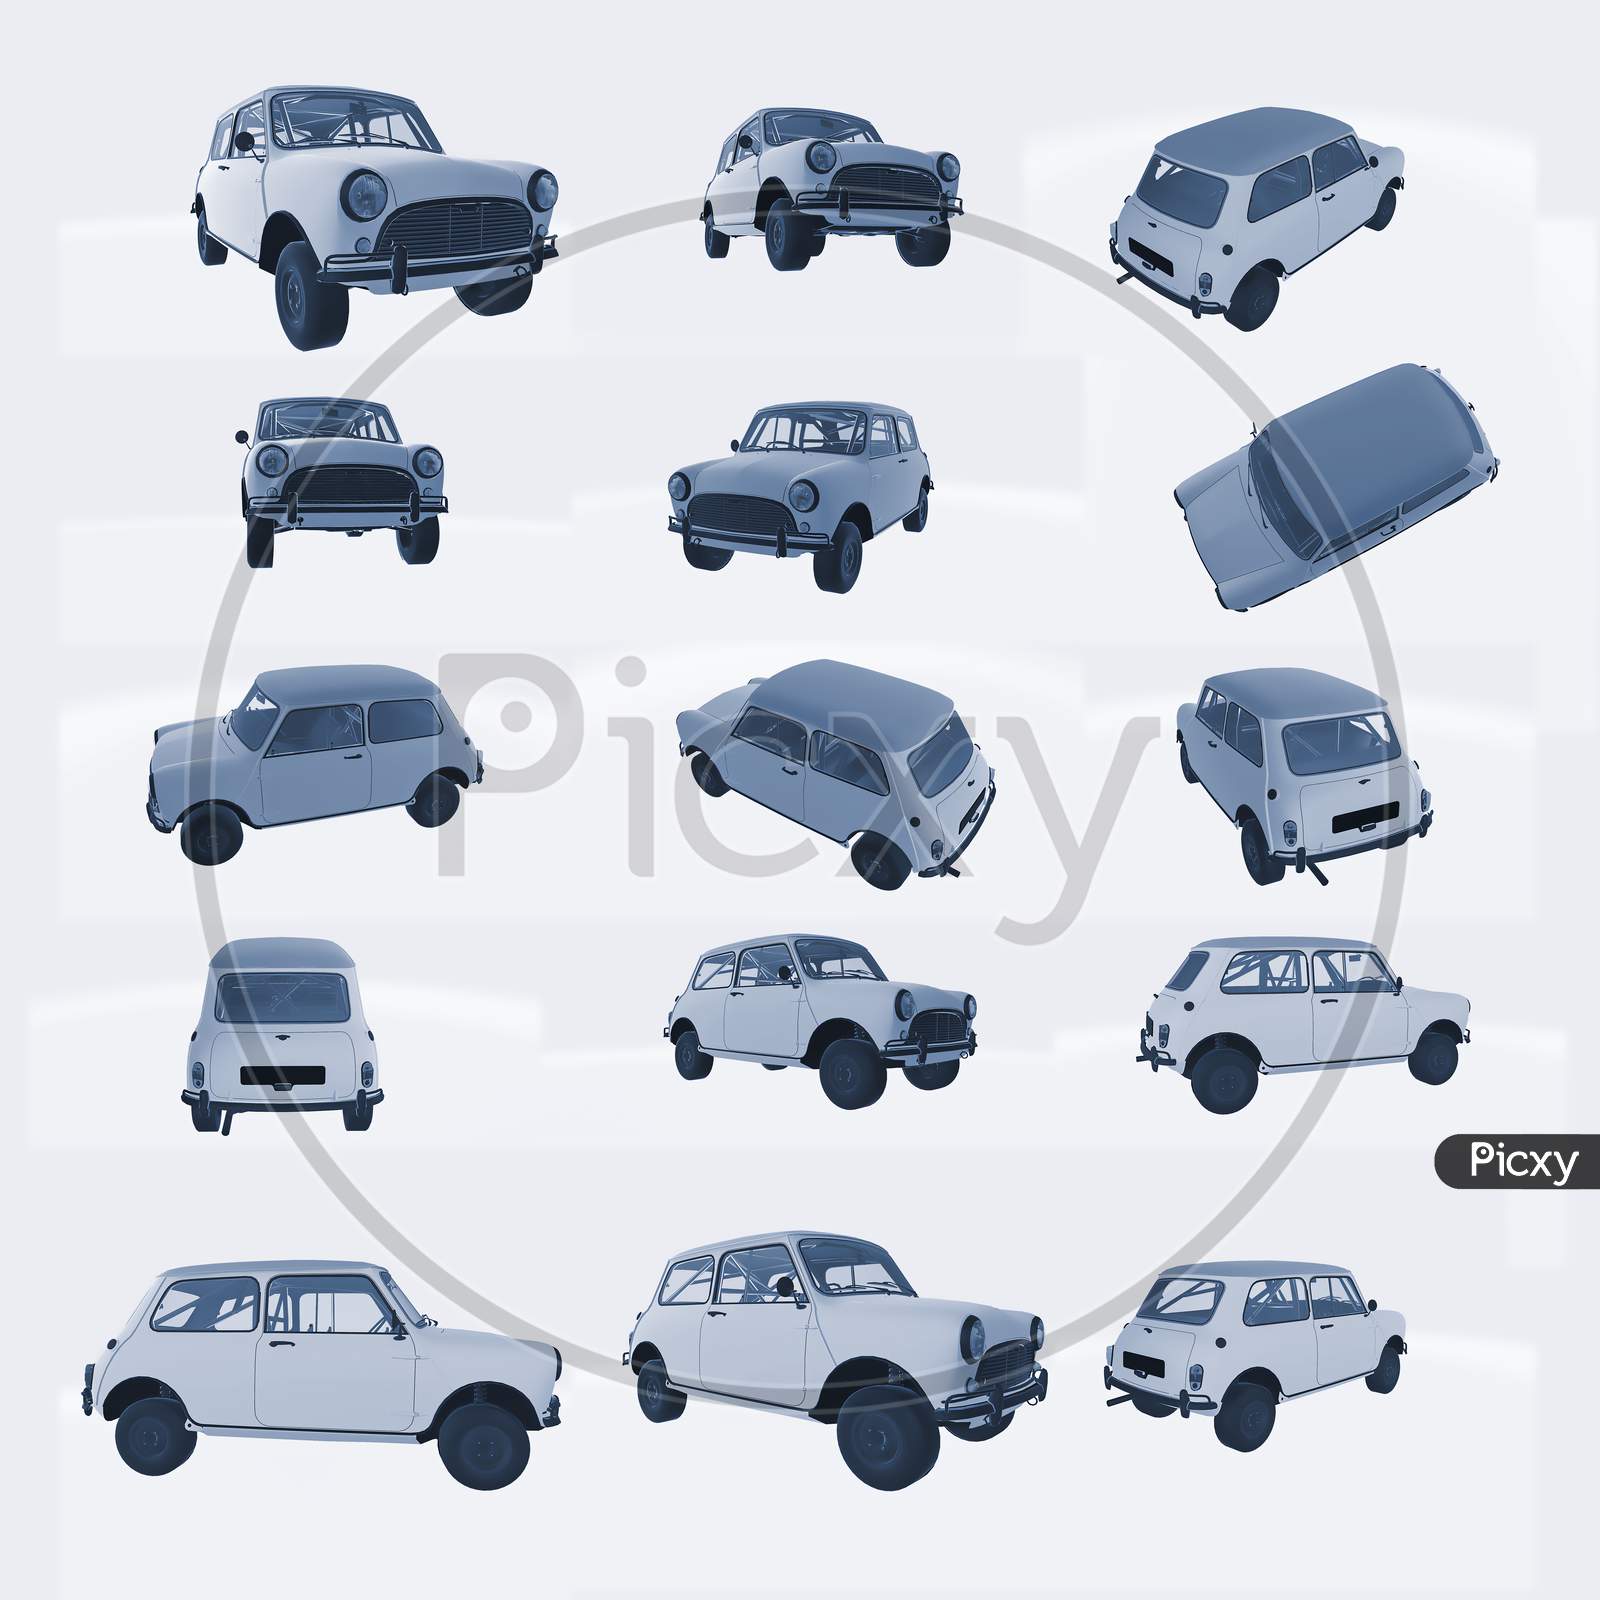 3D Cute Stylized Vintage Car Model Set Isolated On A Light Background. 3D Rendering Illustration Set Of Different Views For Vfx And Animation Movie And Video Game Projects.